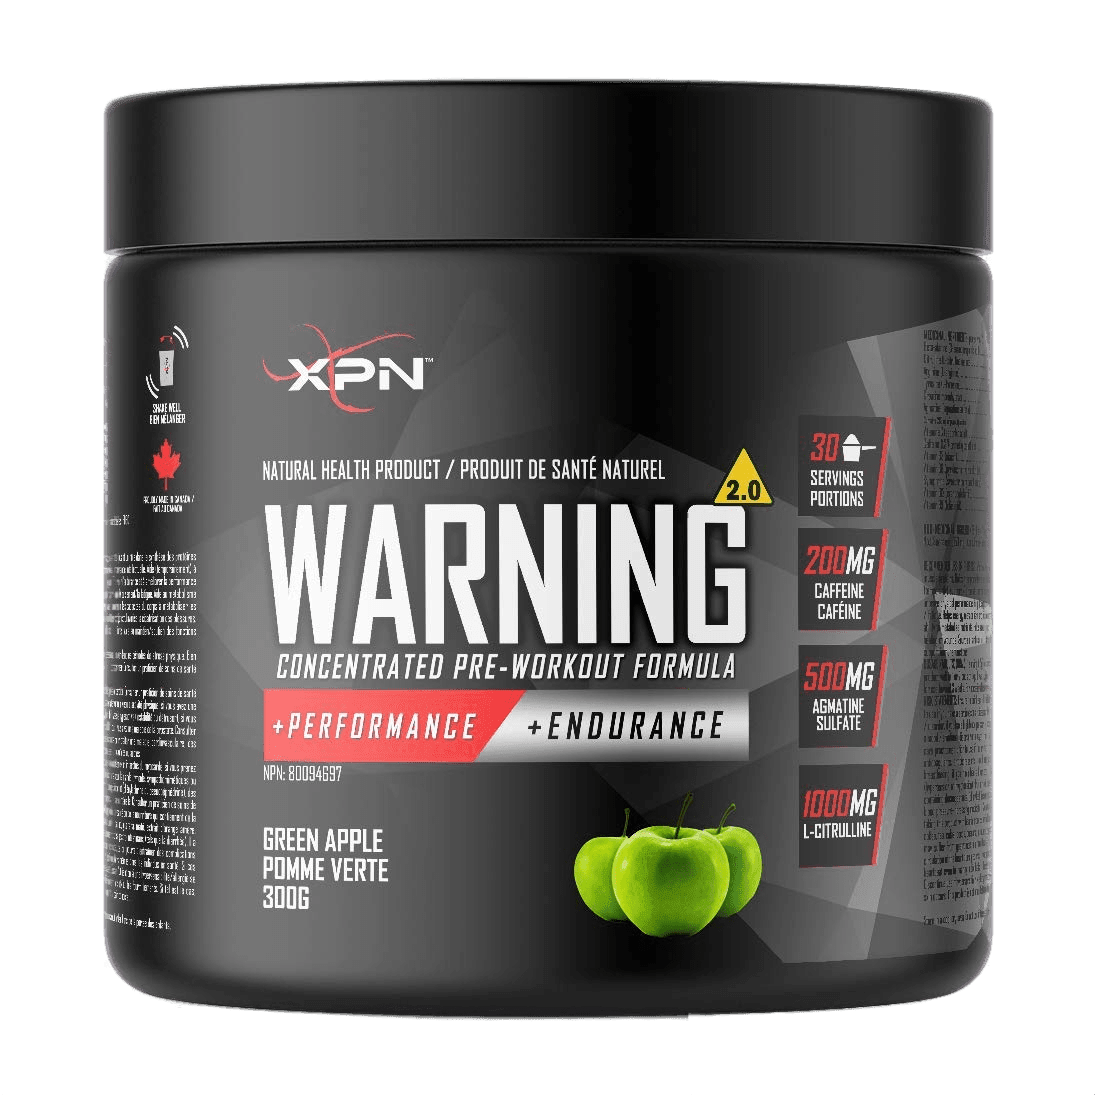 XPN L PRE WORKOUT WARNING ! - The Supplements Factory